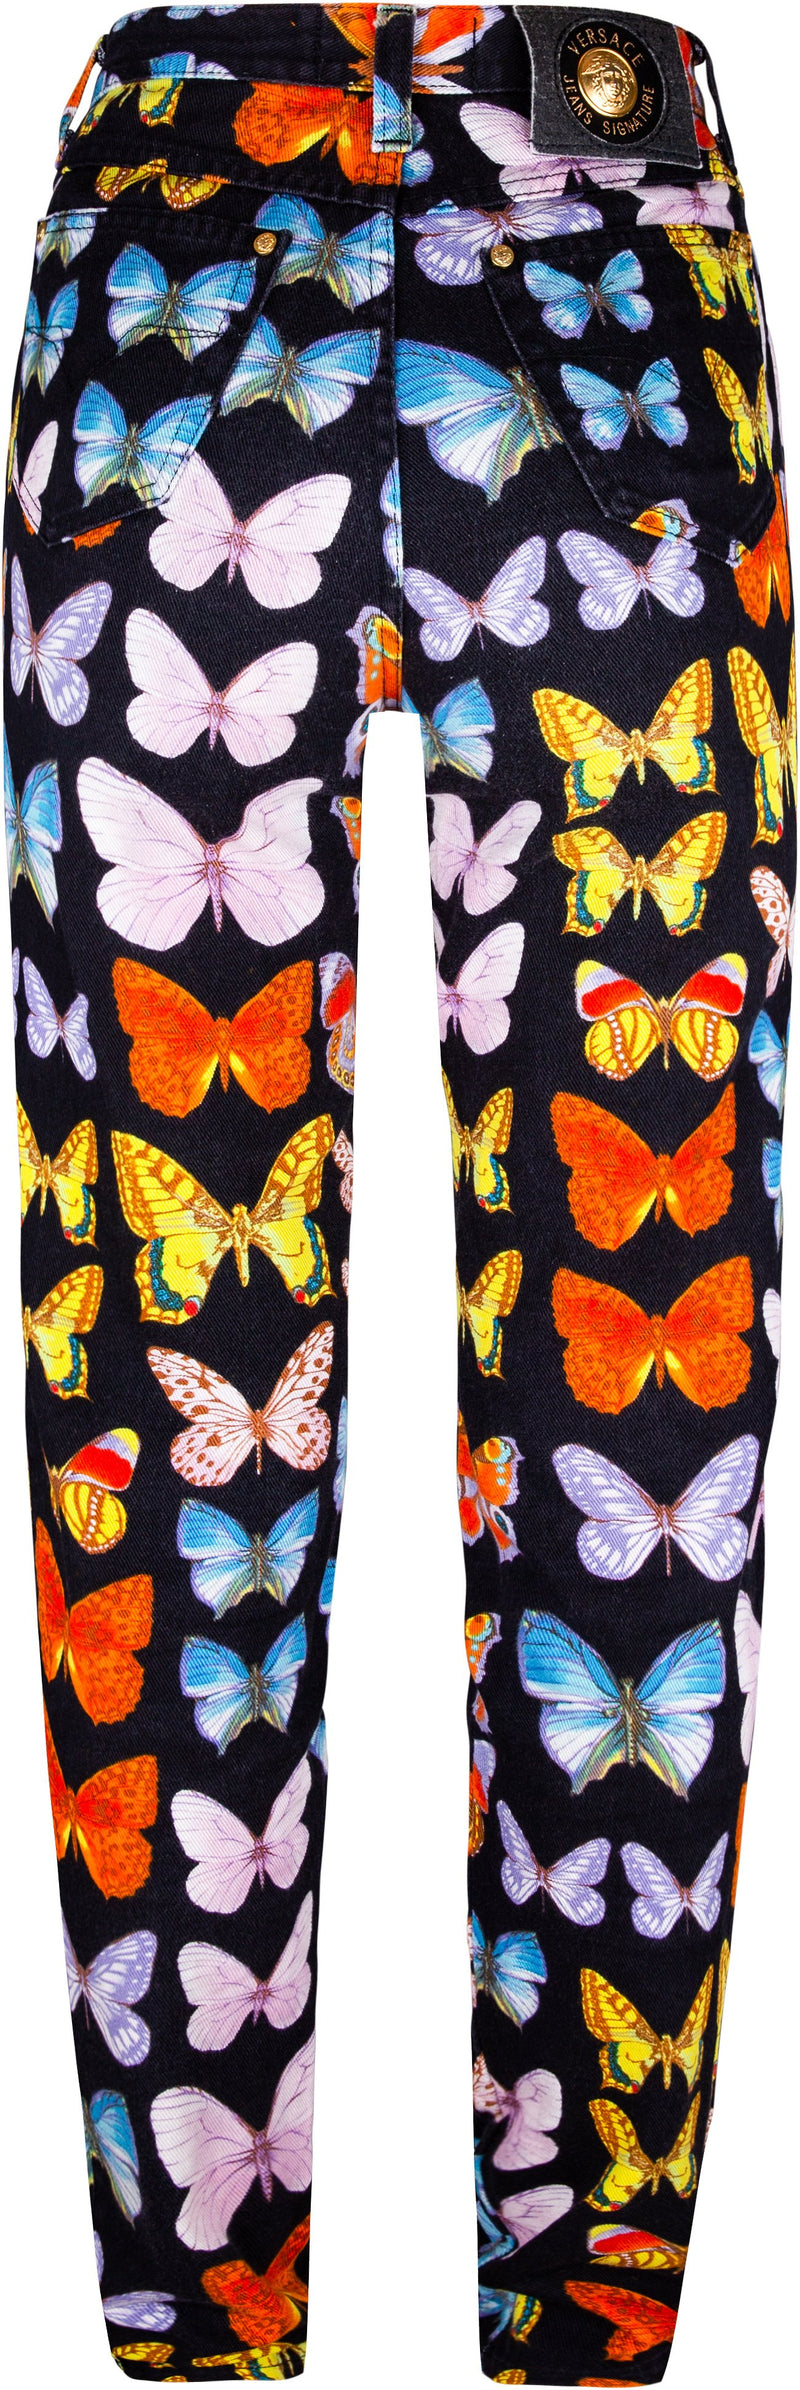 Gianni Versace Spring 1995 Butterfly Jeans